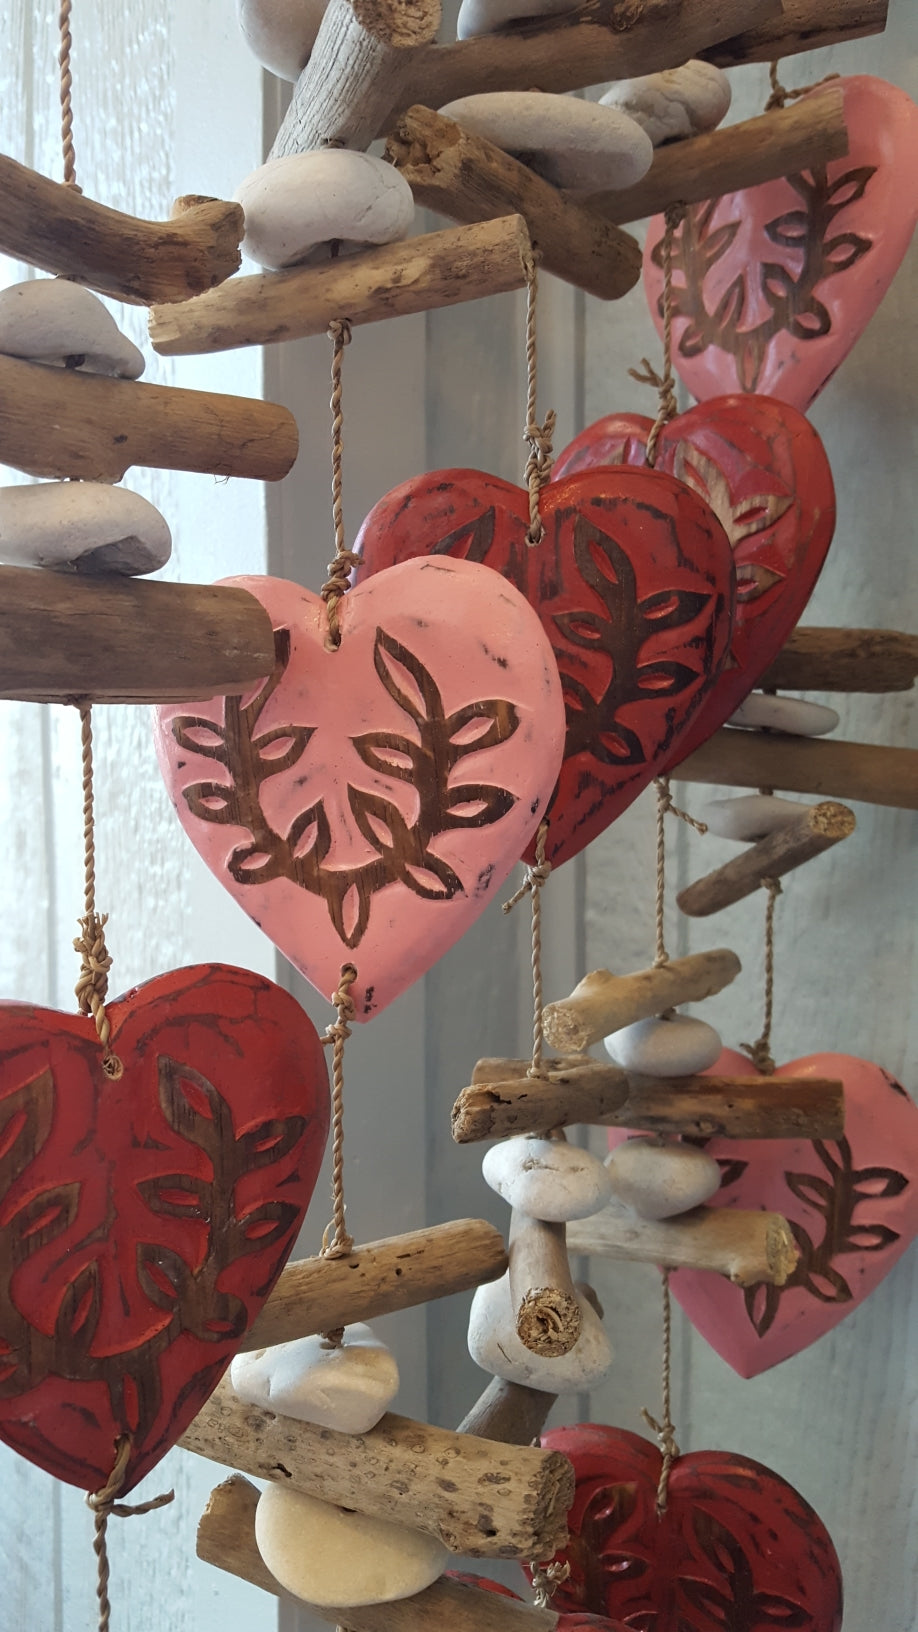 Chime: Wooden Hearts with Driftwood and Stones